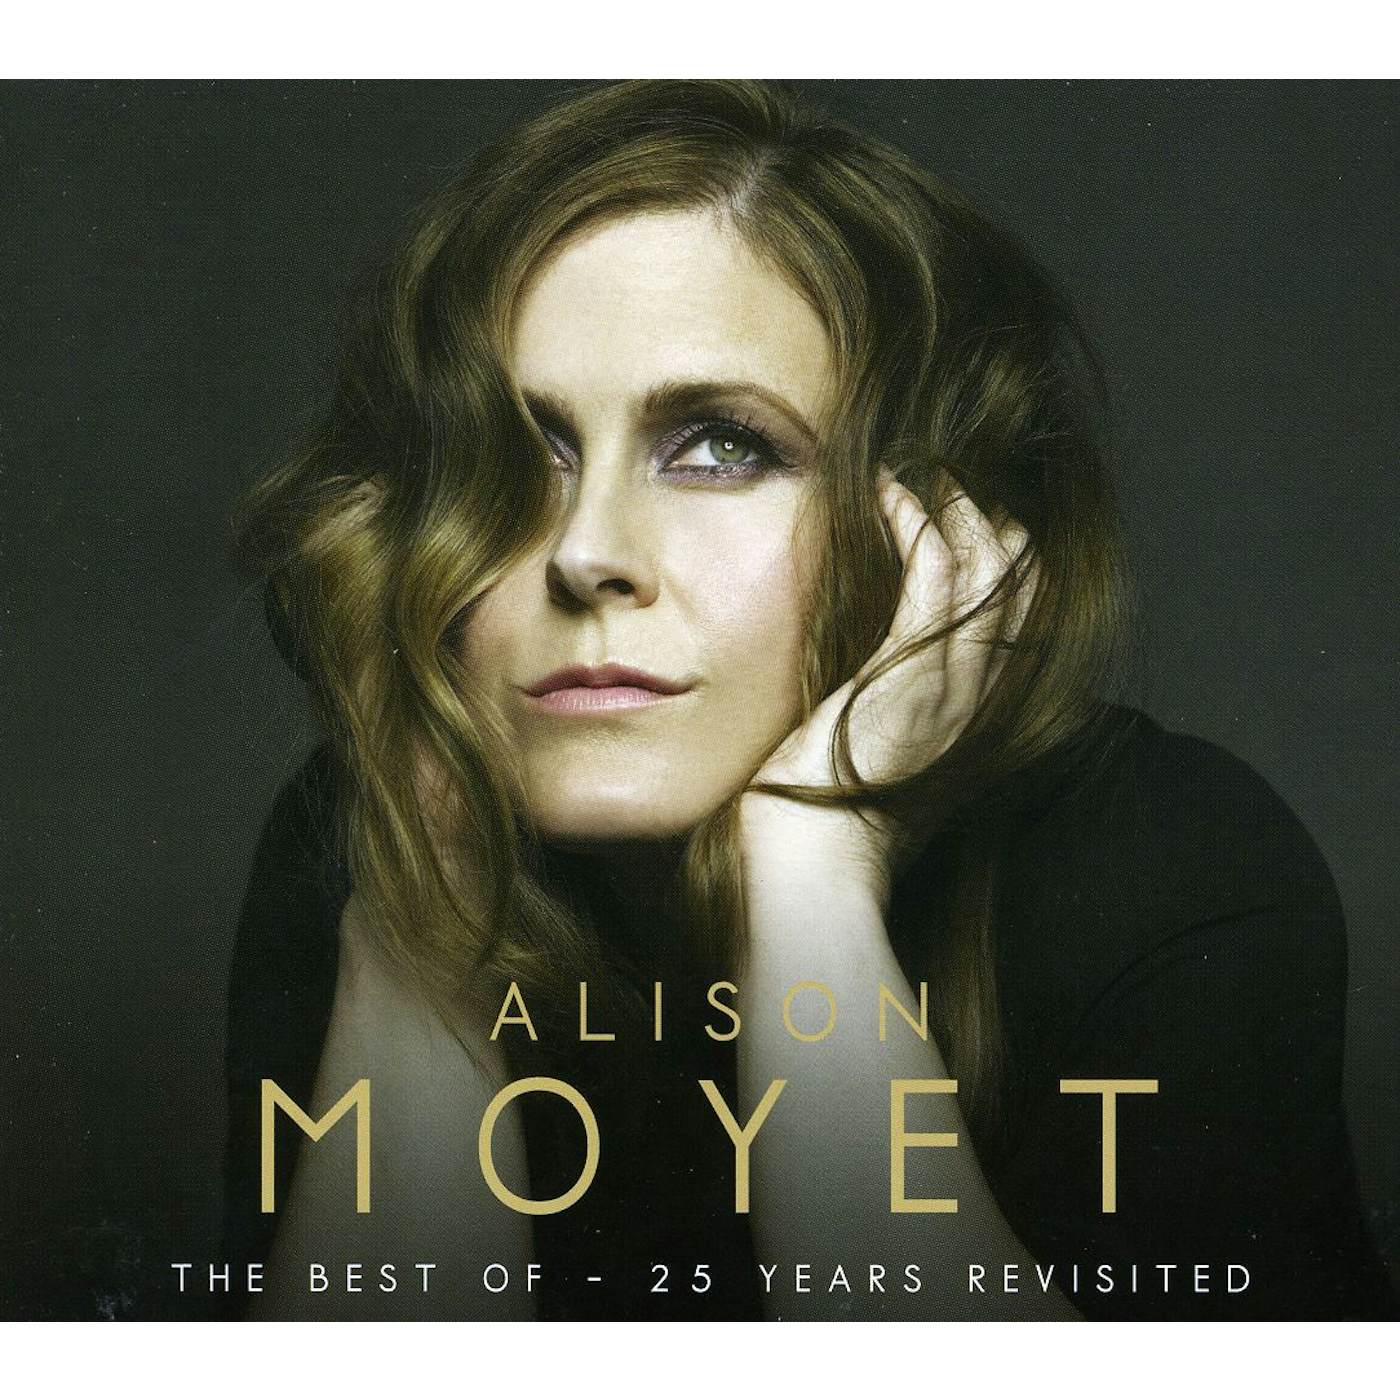 Alison Moyet BEST OF: 25 YEARS REVISITED CD